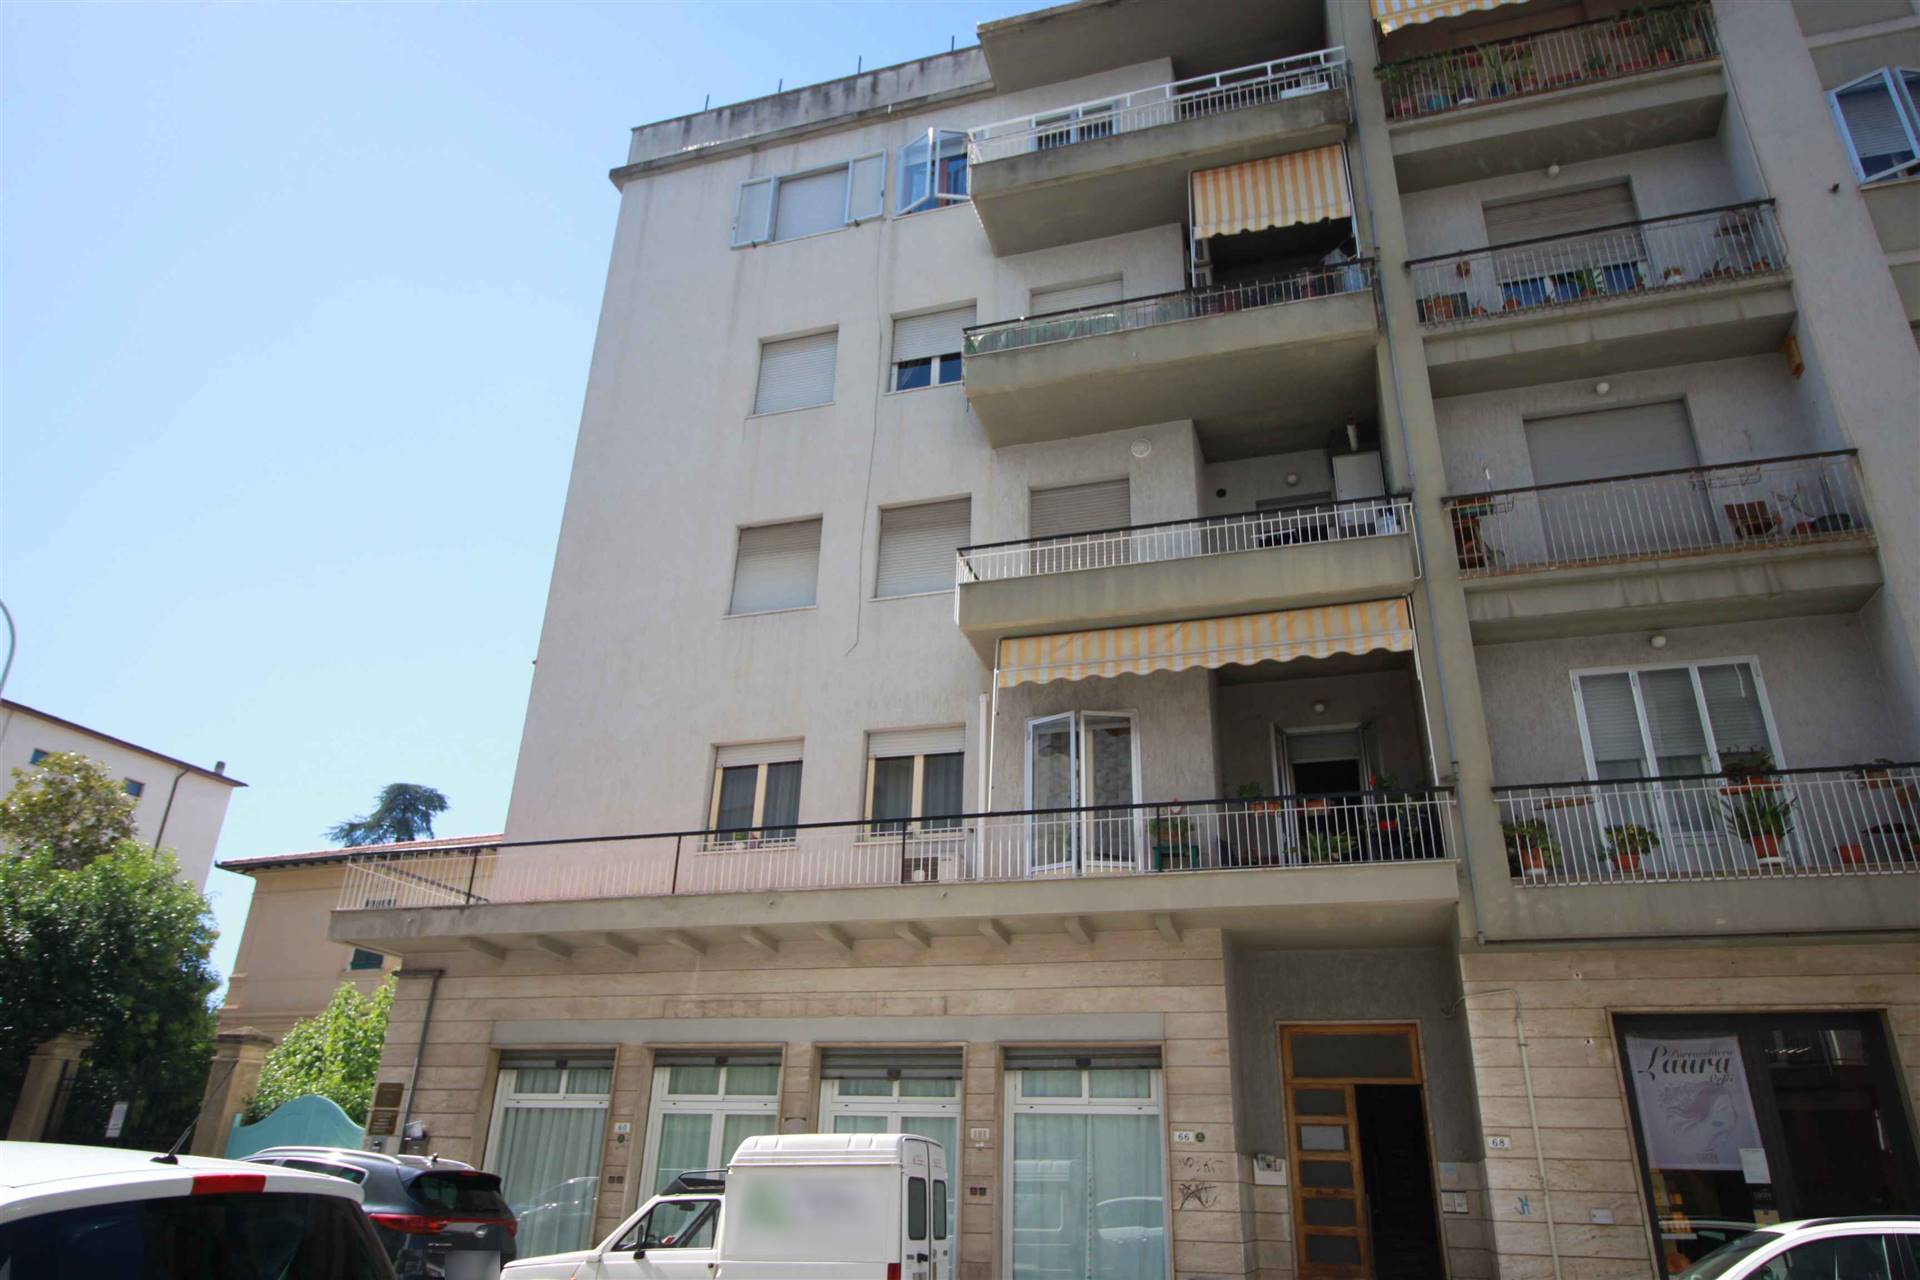 CENTRO CITTÀ, GROSSETO, Apartment for sale of 135 Sq. mt., Excellent Condition, Heating Individual heating system, Energetic class: E, placed at 1° 